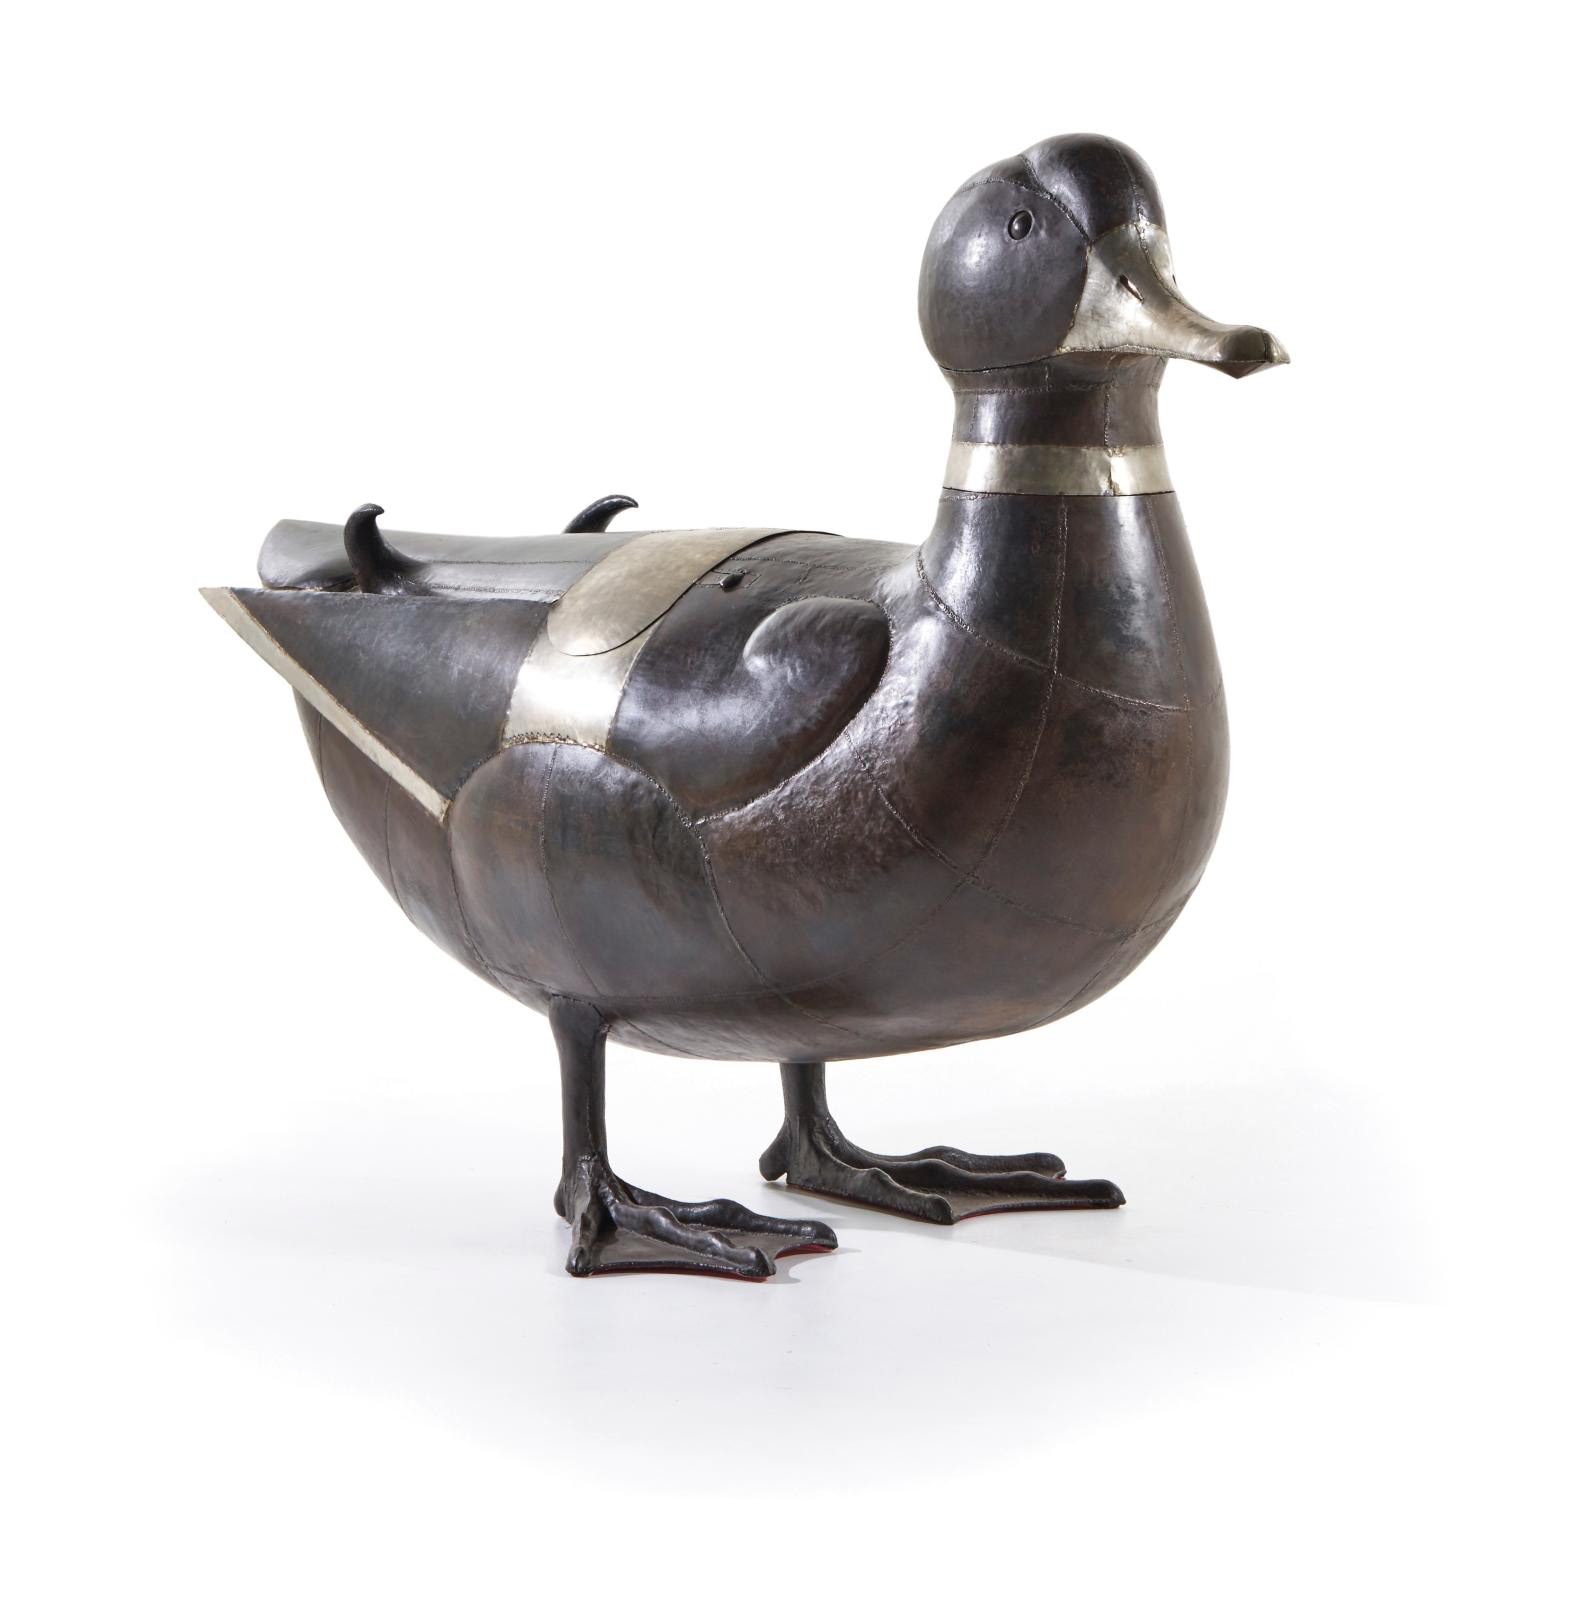 François-Xavier Lalanne and Alberto Giacometti: Winning Bids at Drouot 